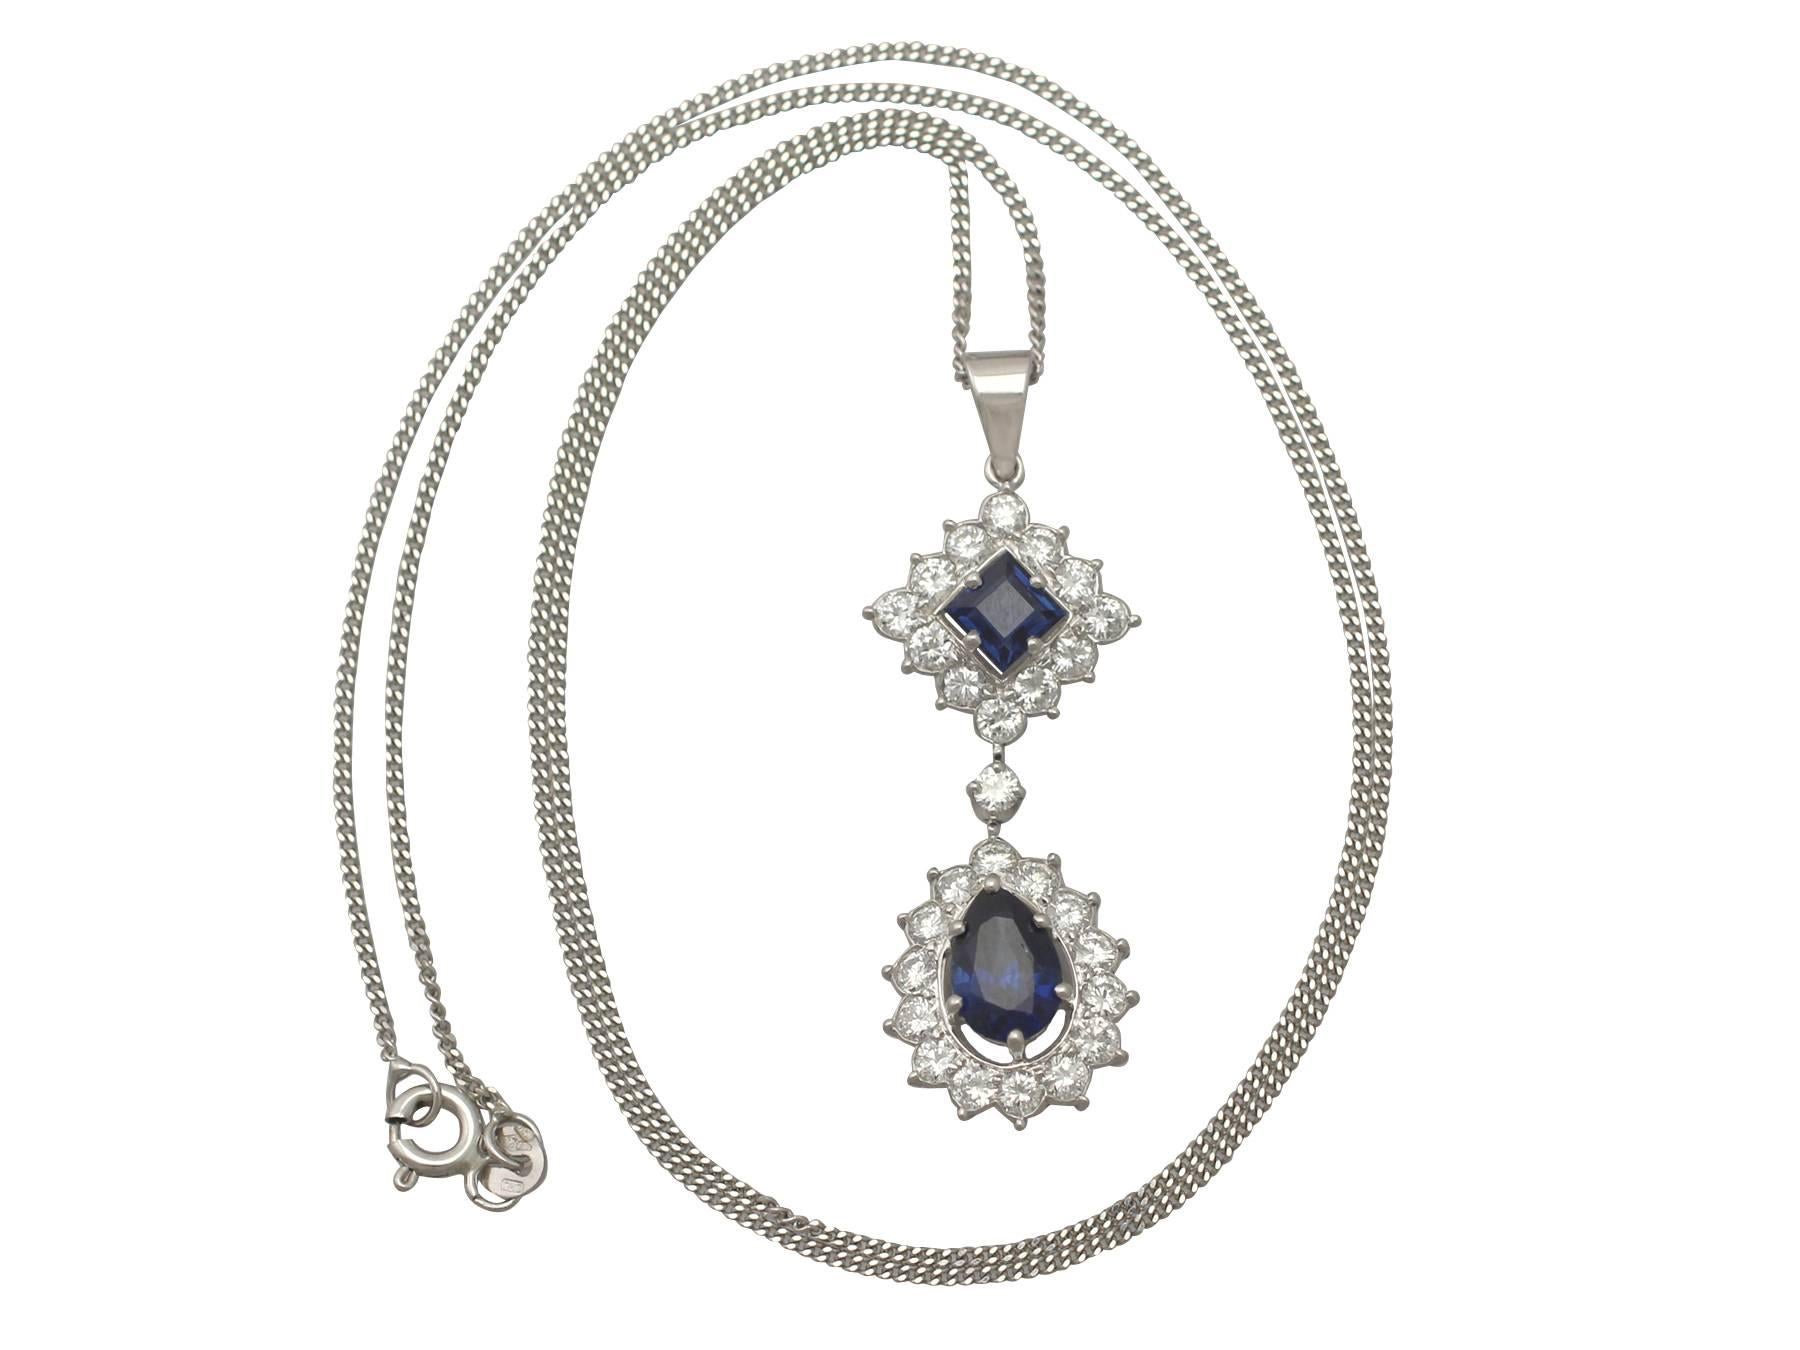 A stunning 2.02 carat blue sapphire and 1.43 carat diamond, platinum pendant with an 18 carat white gold chain.

This stunning, fine and impressive blue sapphire and diamond pendant has been crafted in platinum.

The pendant displays a pear cut